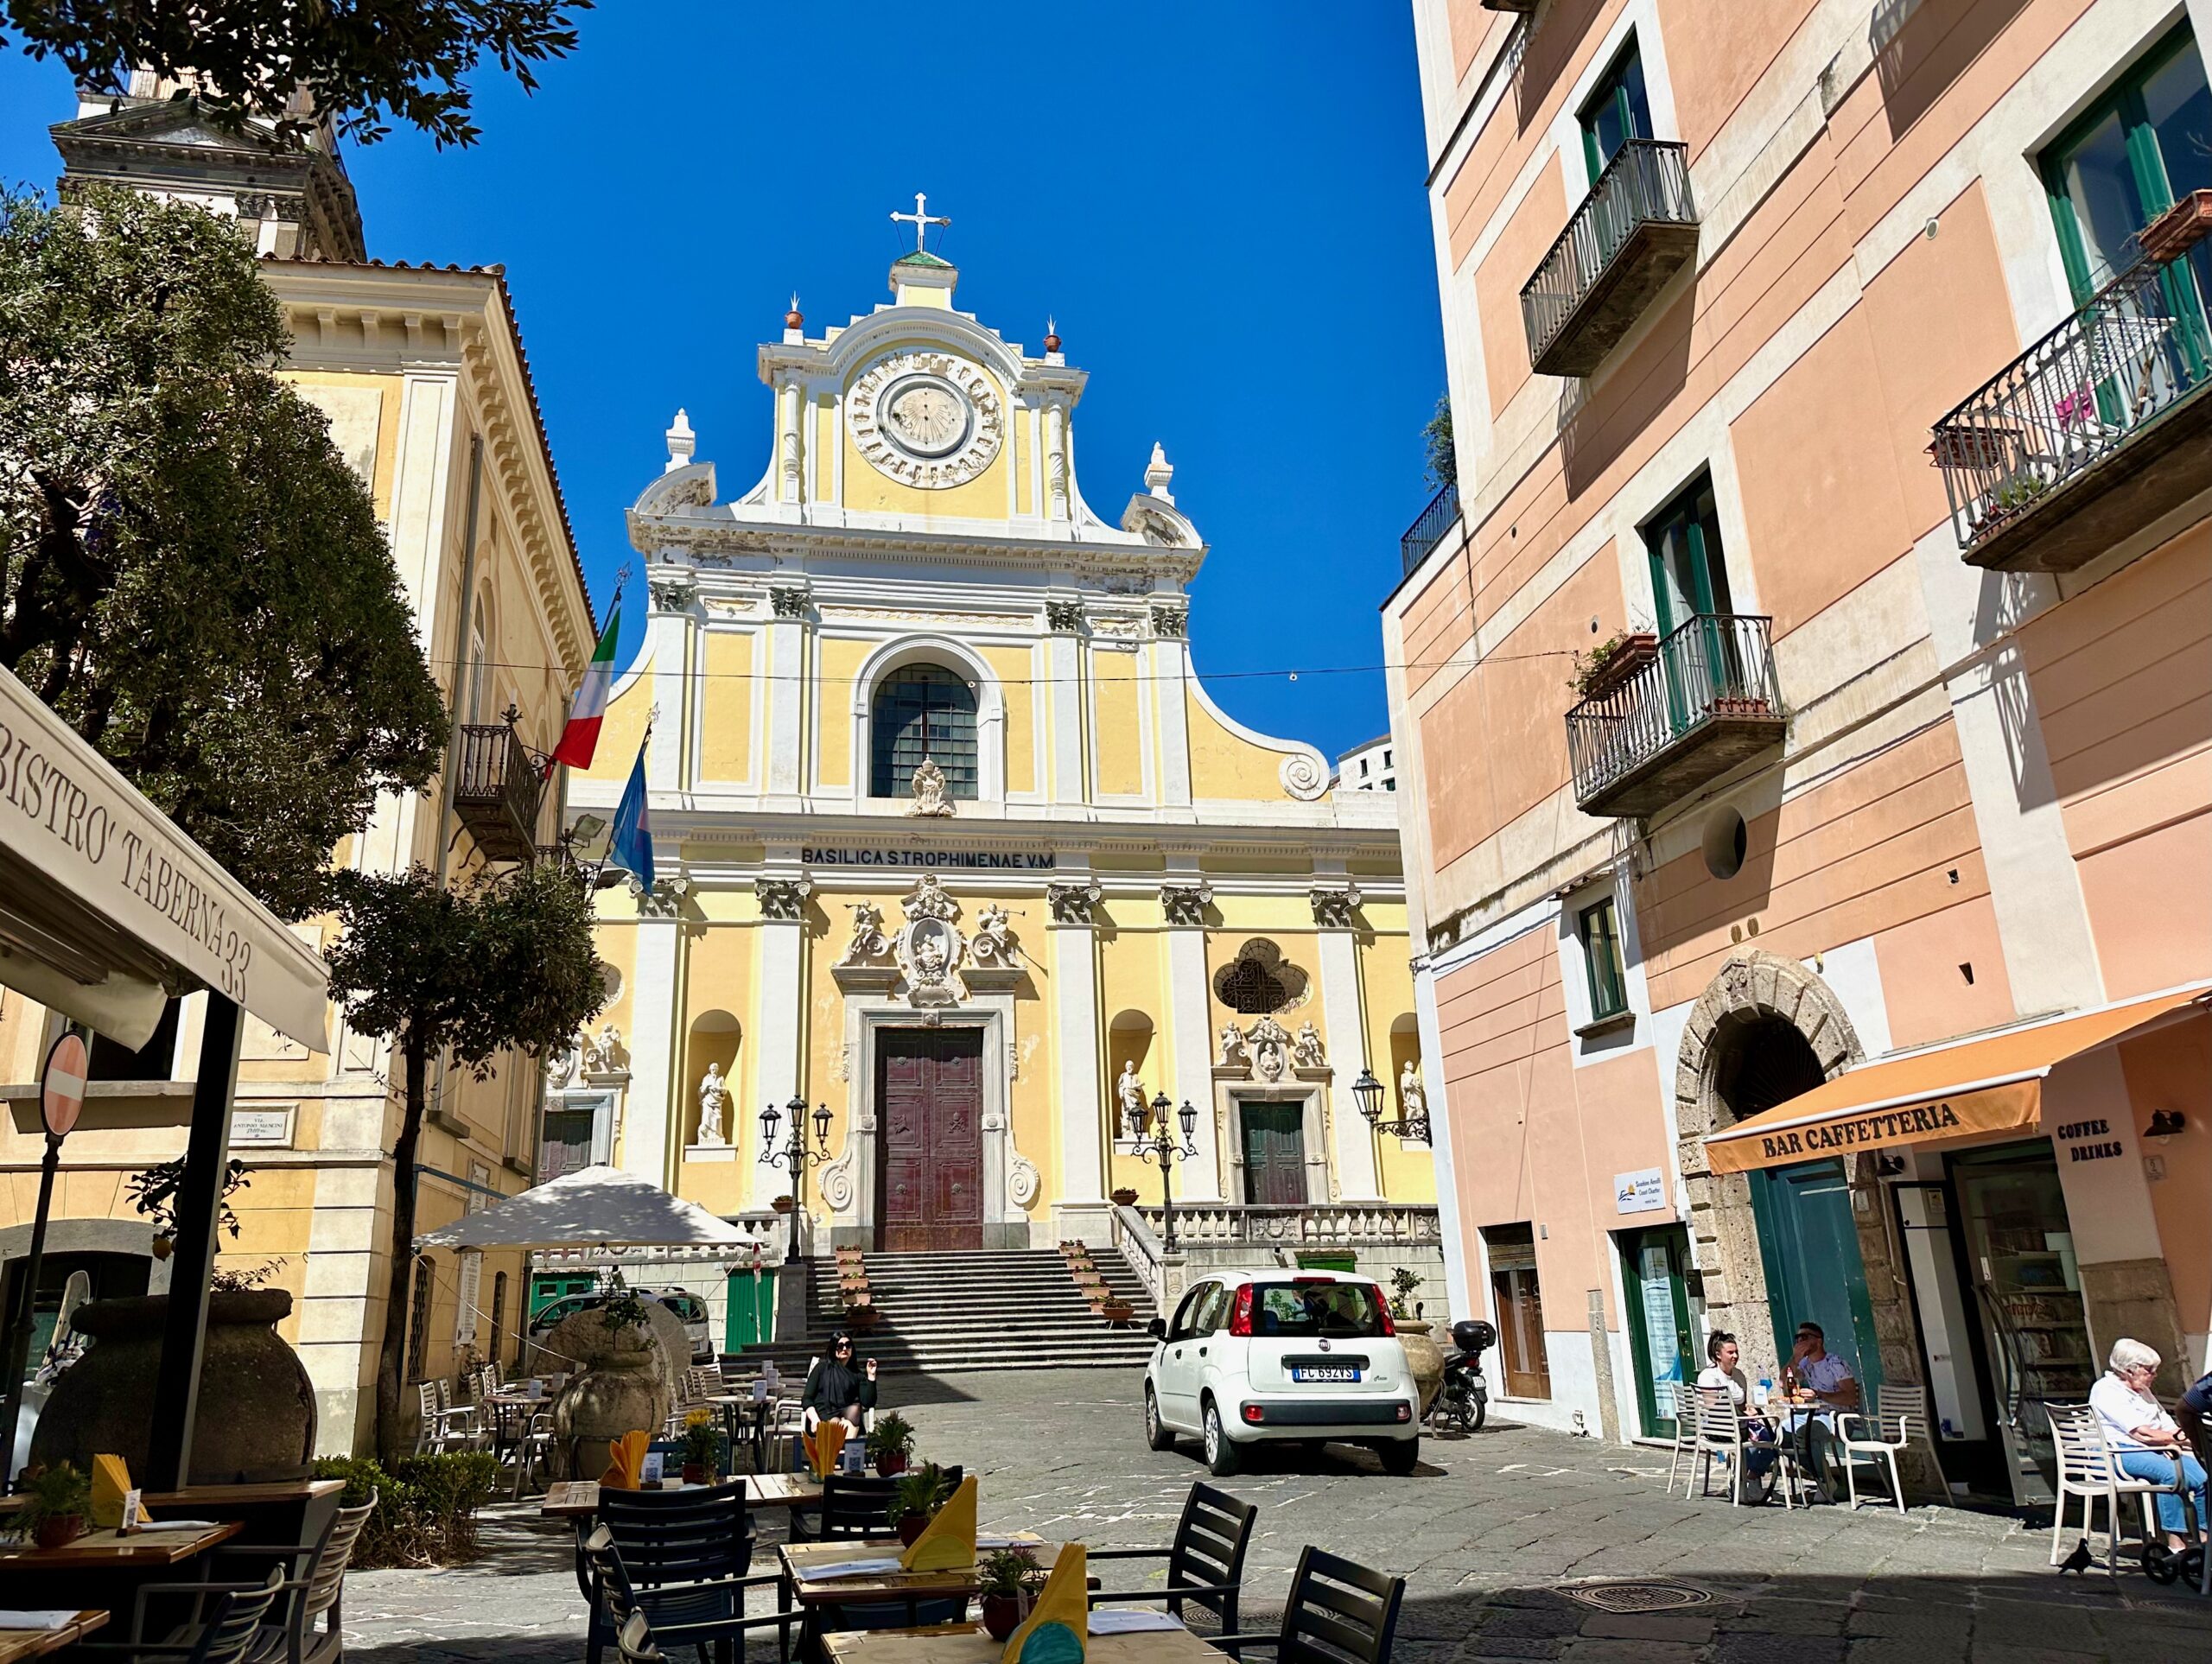 Basilica with a yellow and white facade and restaurants on either side of the street in Minori on the Amalfi Coast.